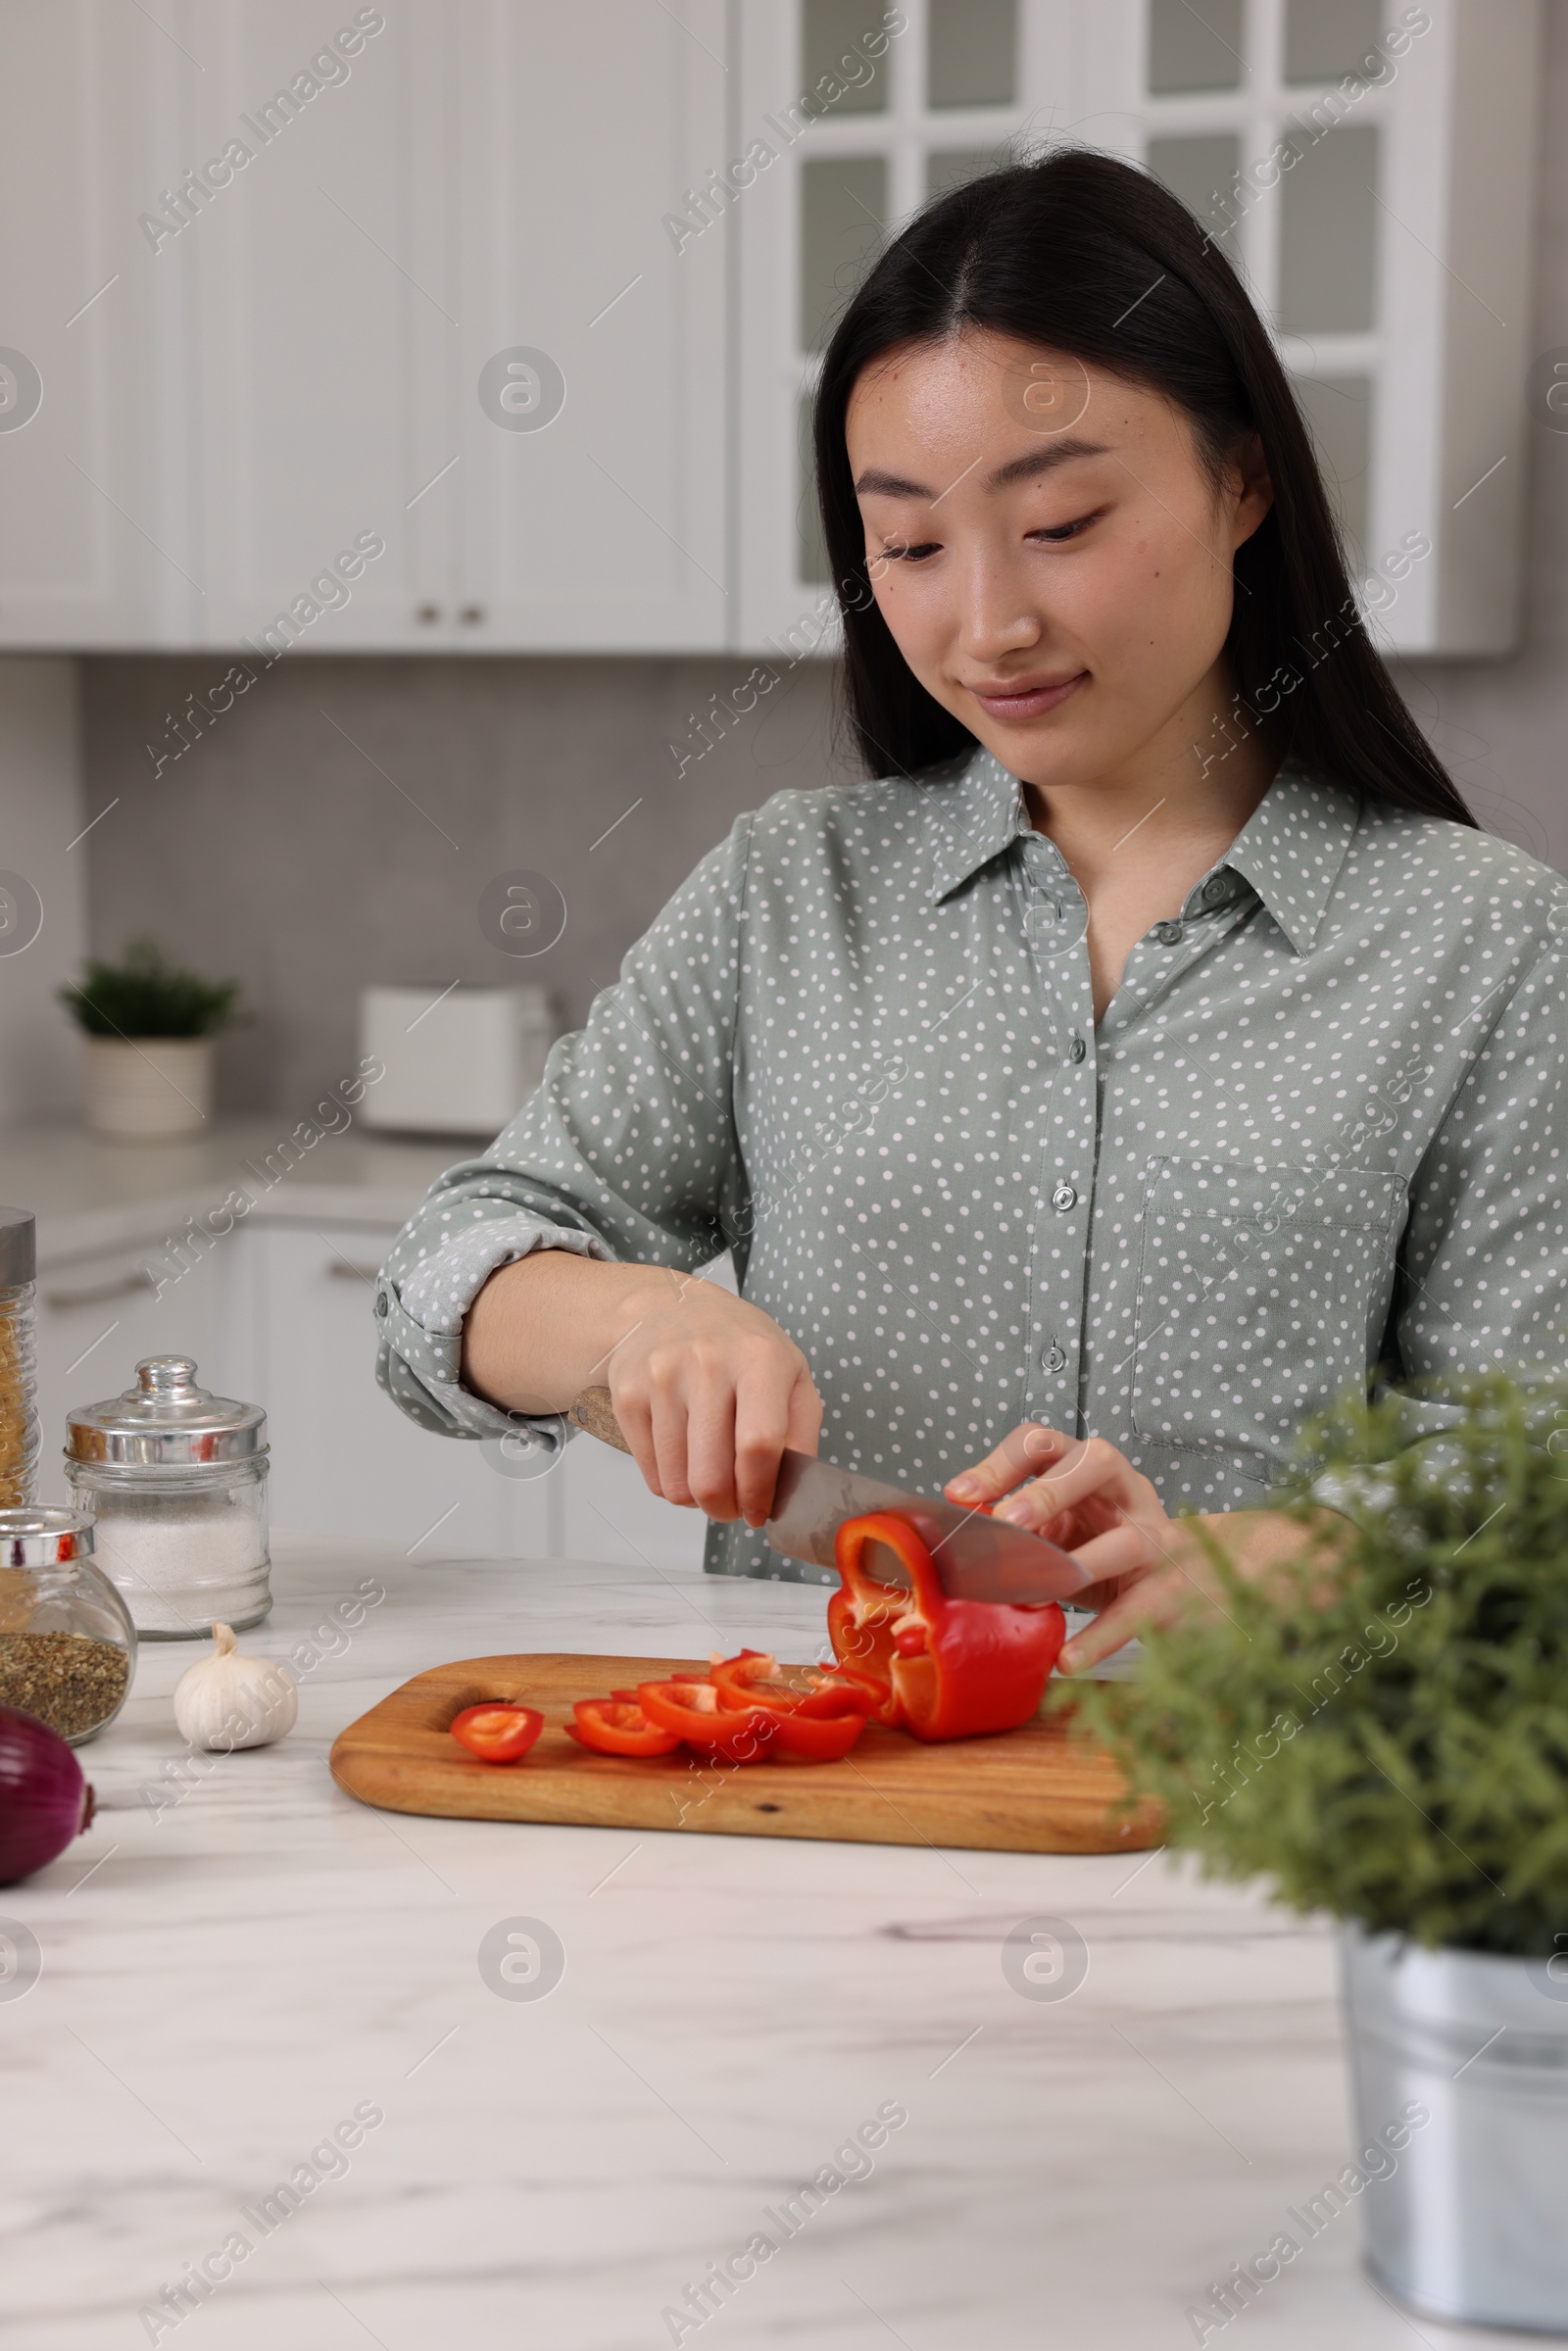 Photo of Cooking process. Beautiful woman cutting bell pepper at white marble countertop in kitchen